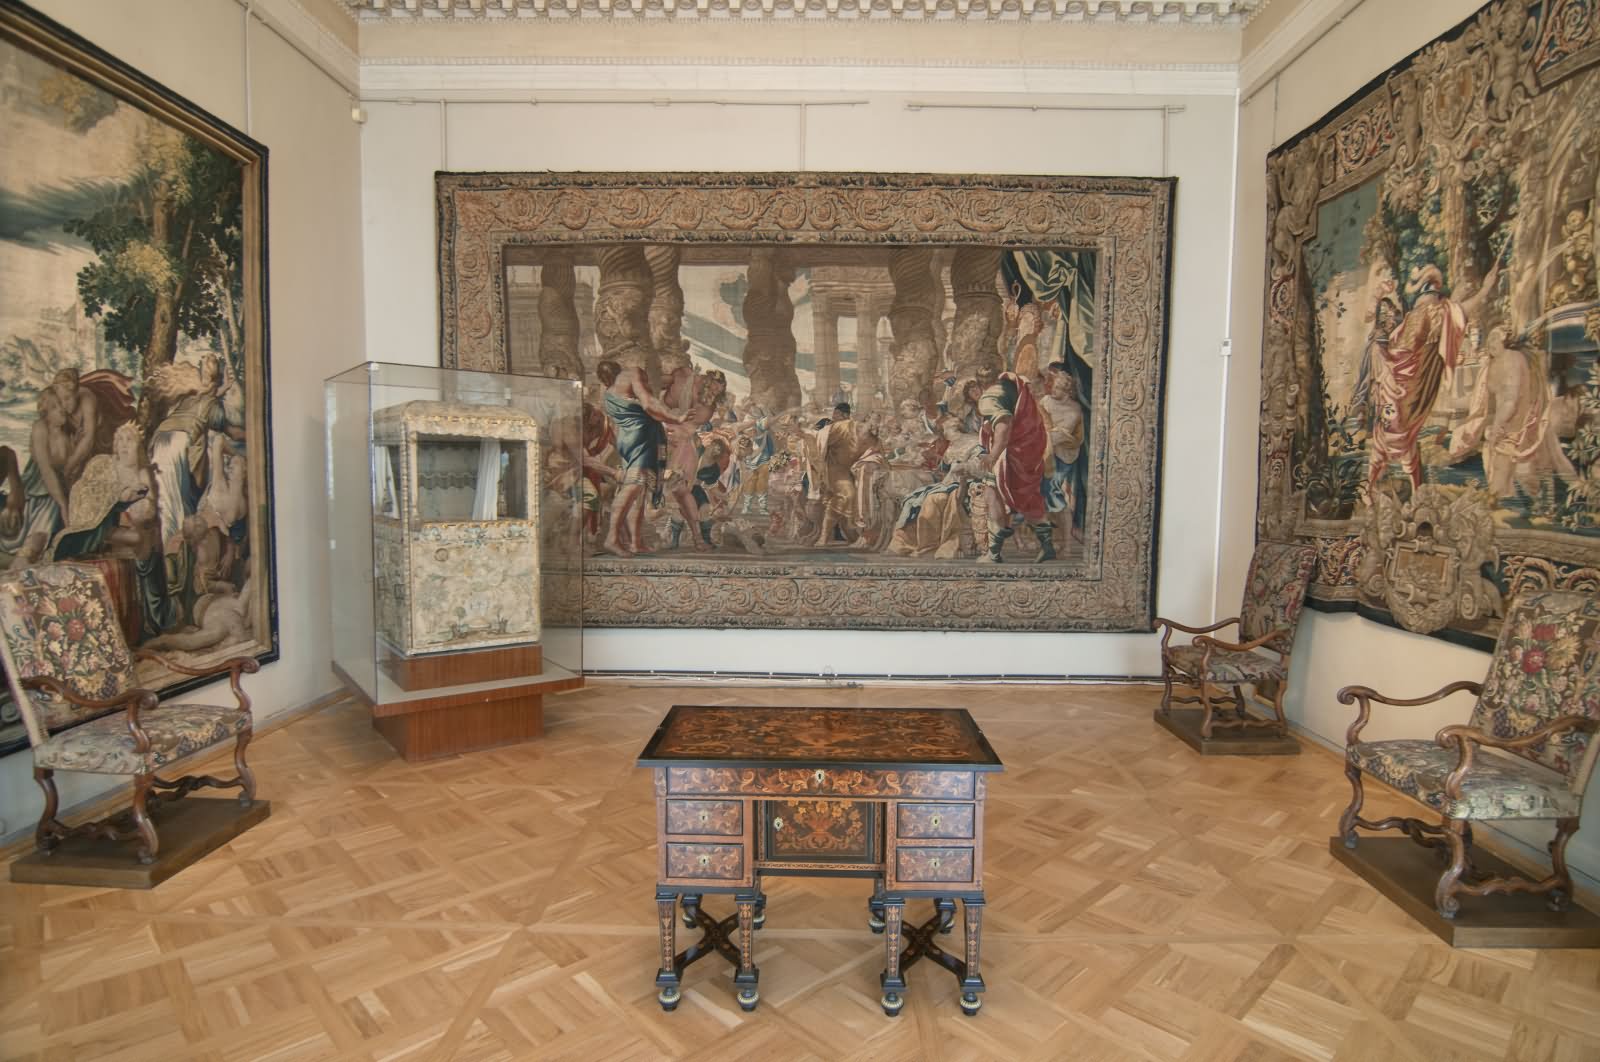 Pushkin And Saint Tapestry Inside The Hermitage Museum